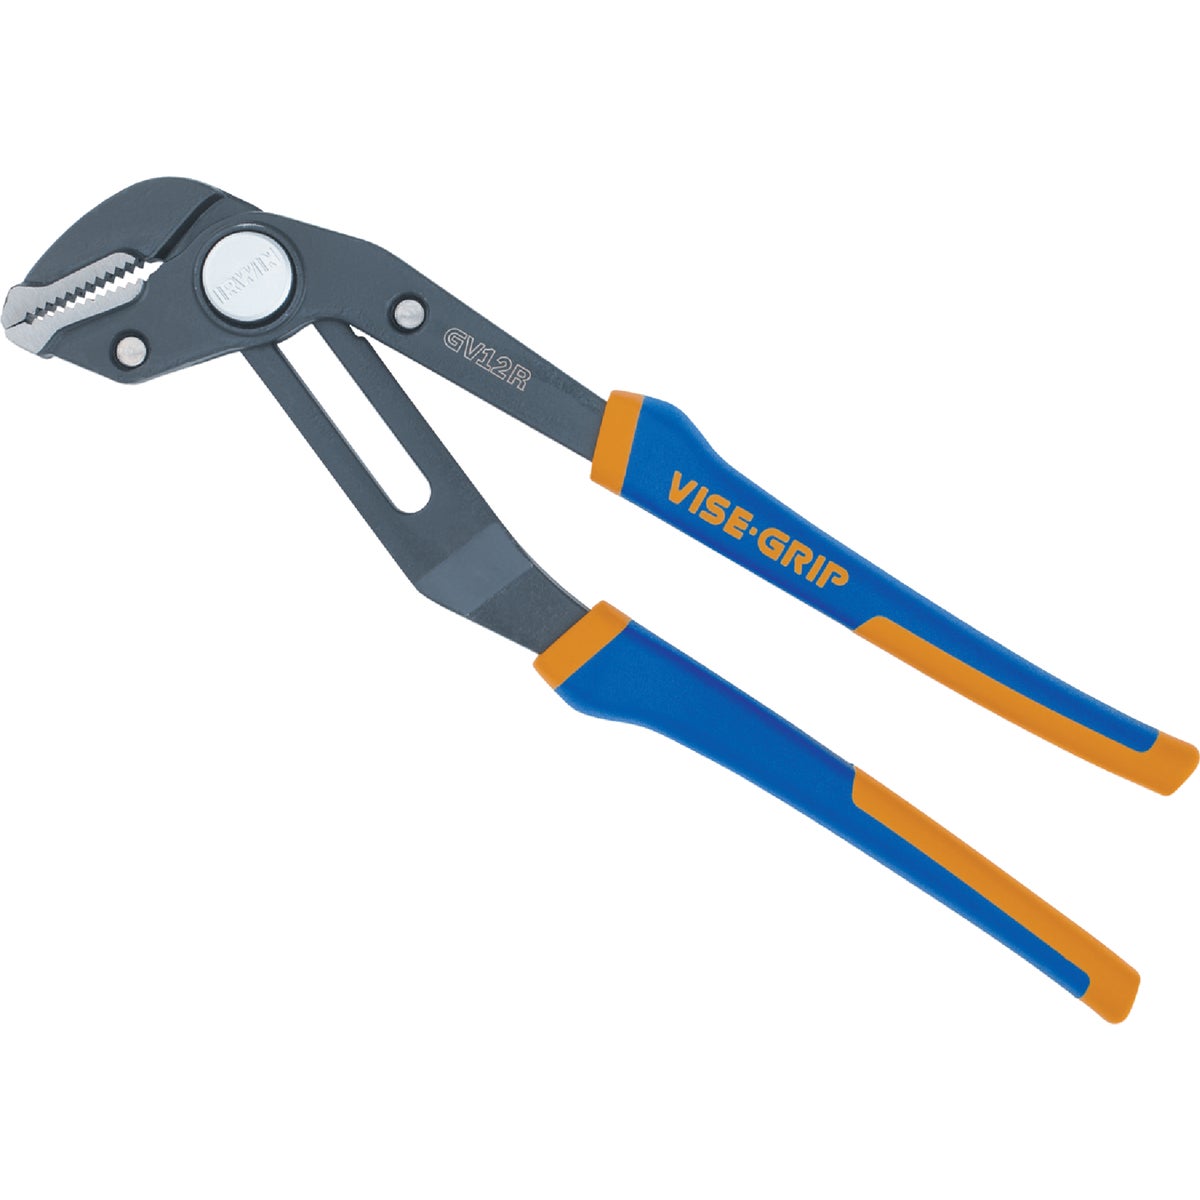 Irwin Vise-Grip 12 In. Straight Jaw GrooveLock Groove Joint Pliers